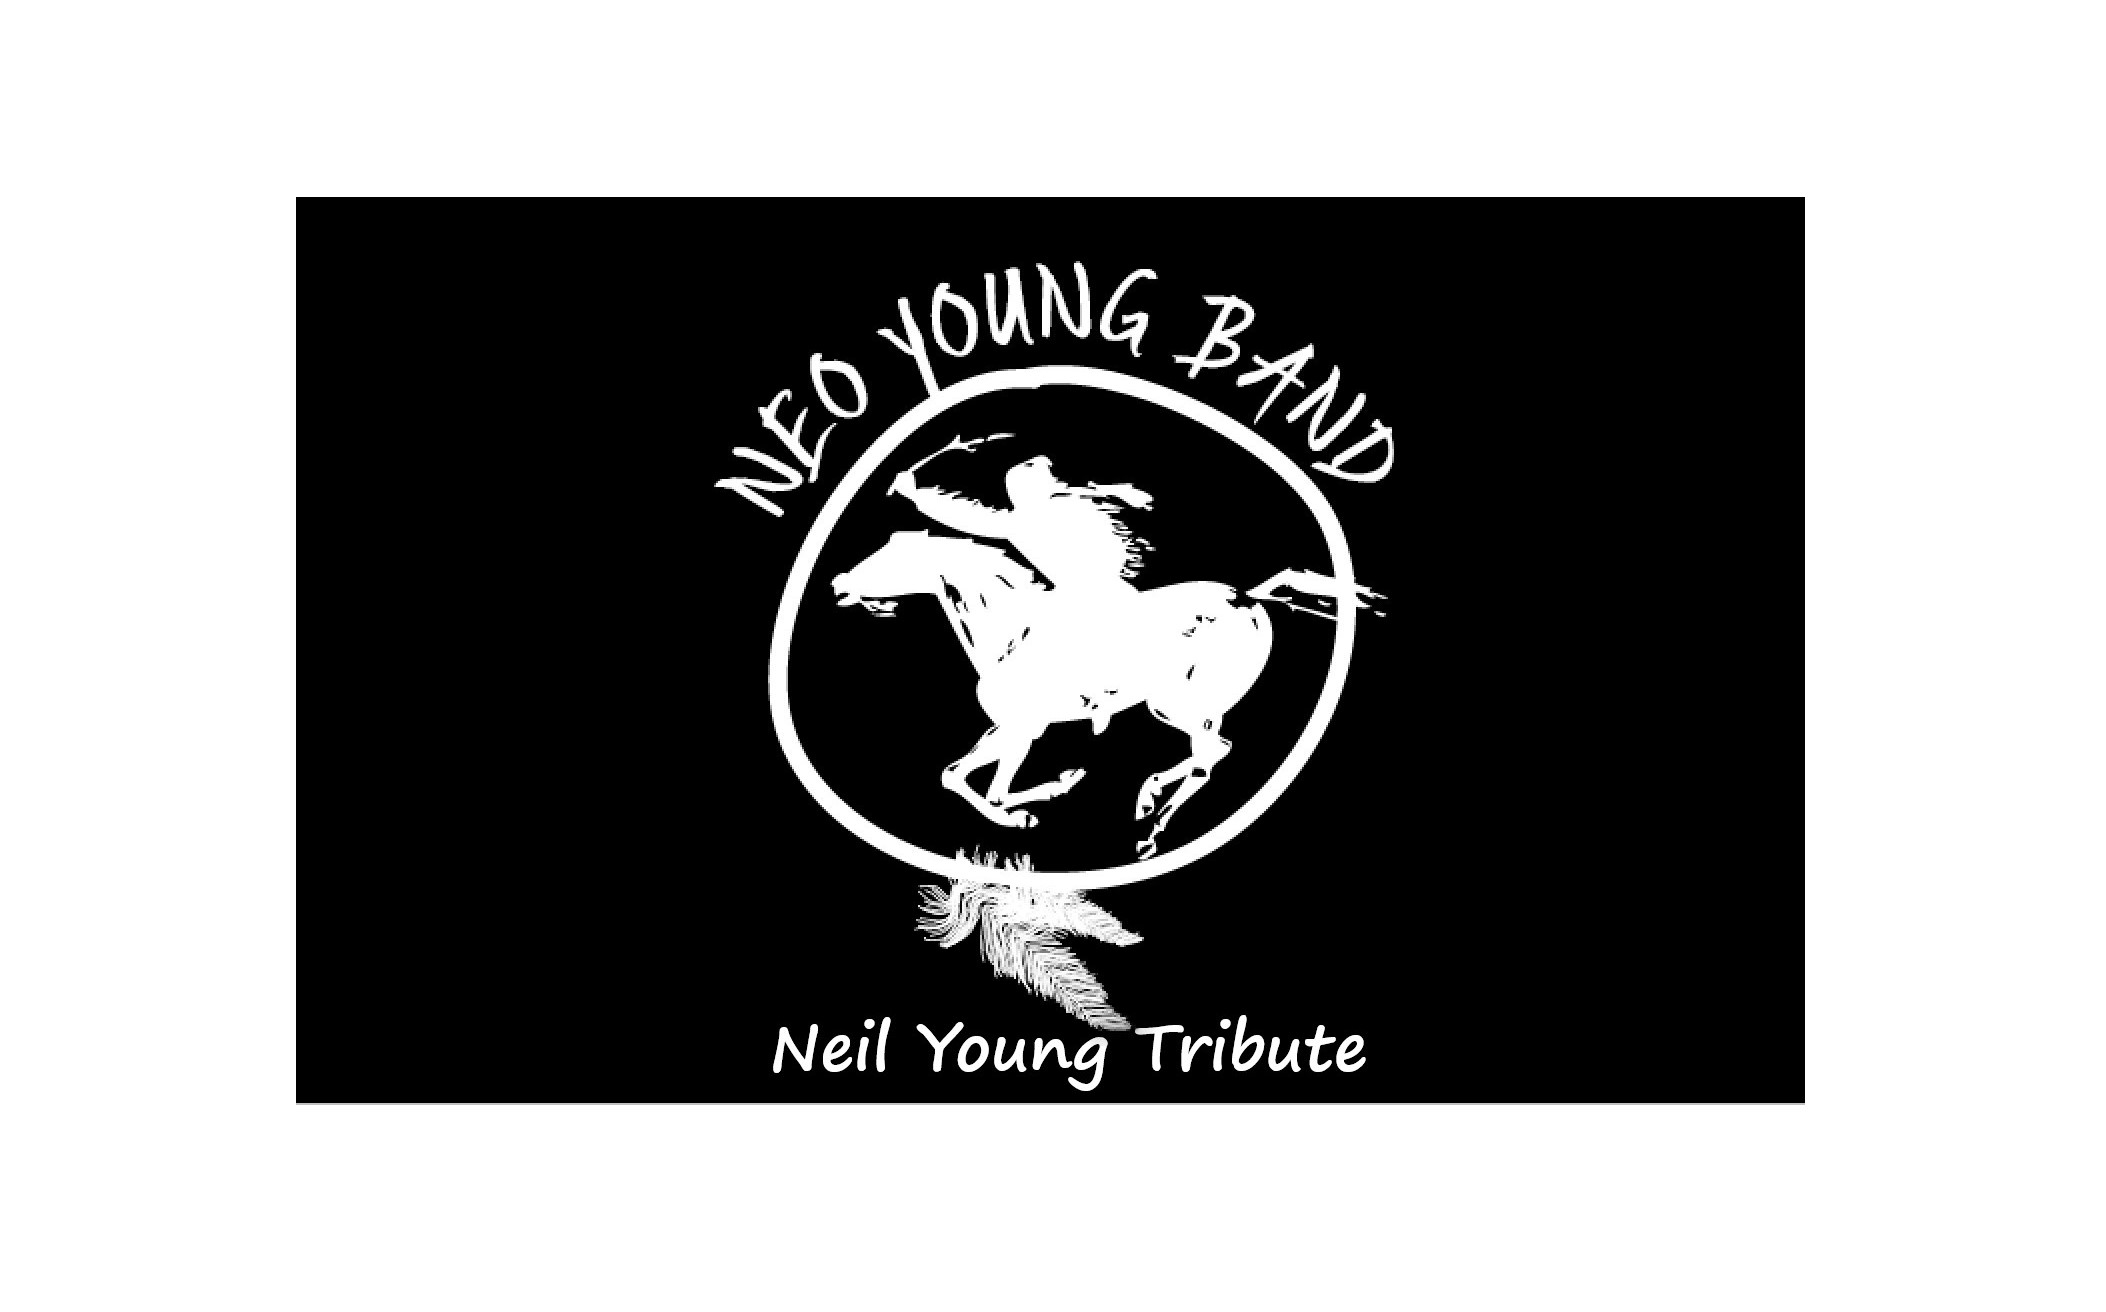 Neo Young Band live in concert